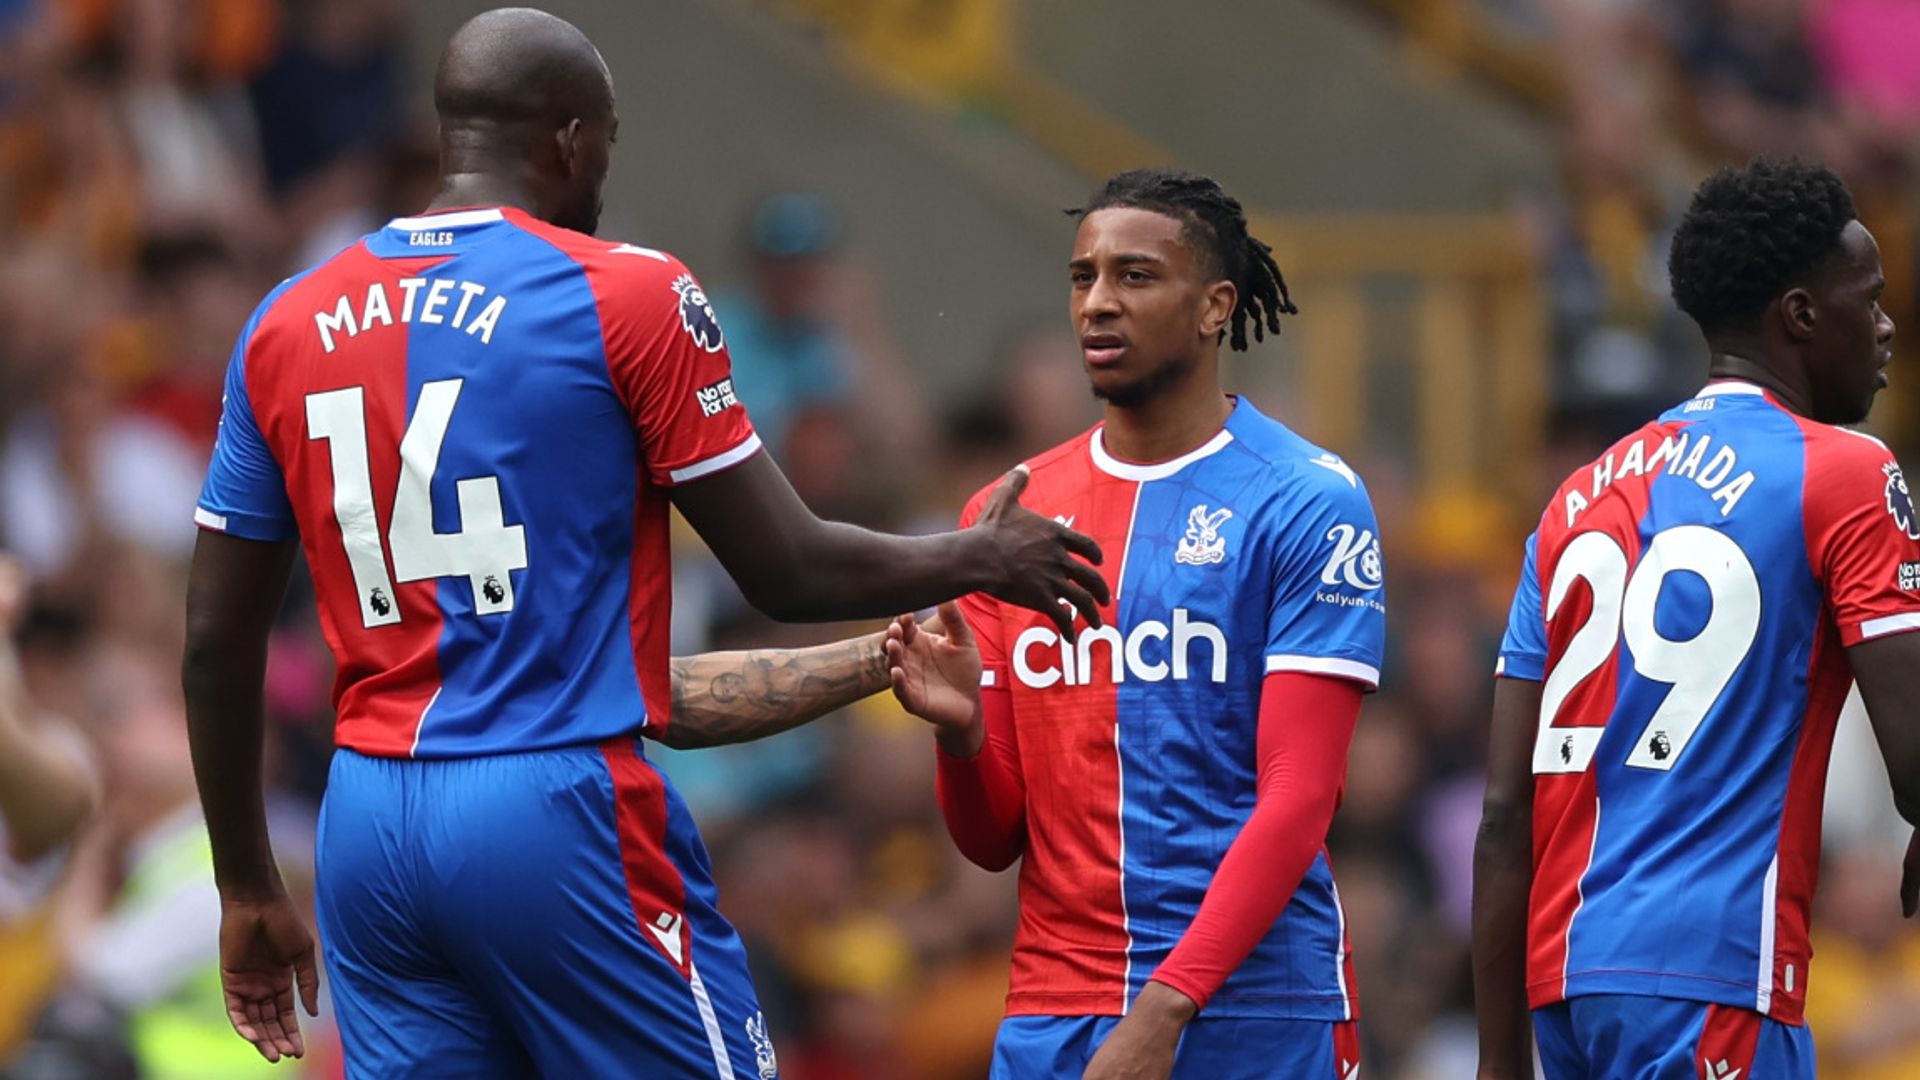 Palace leapfrog Wolves with win at Molineux